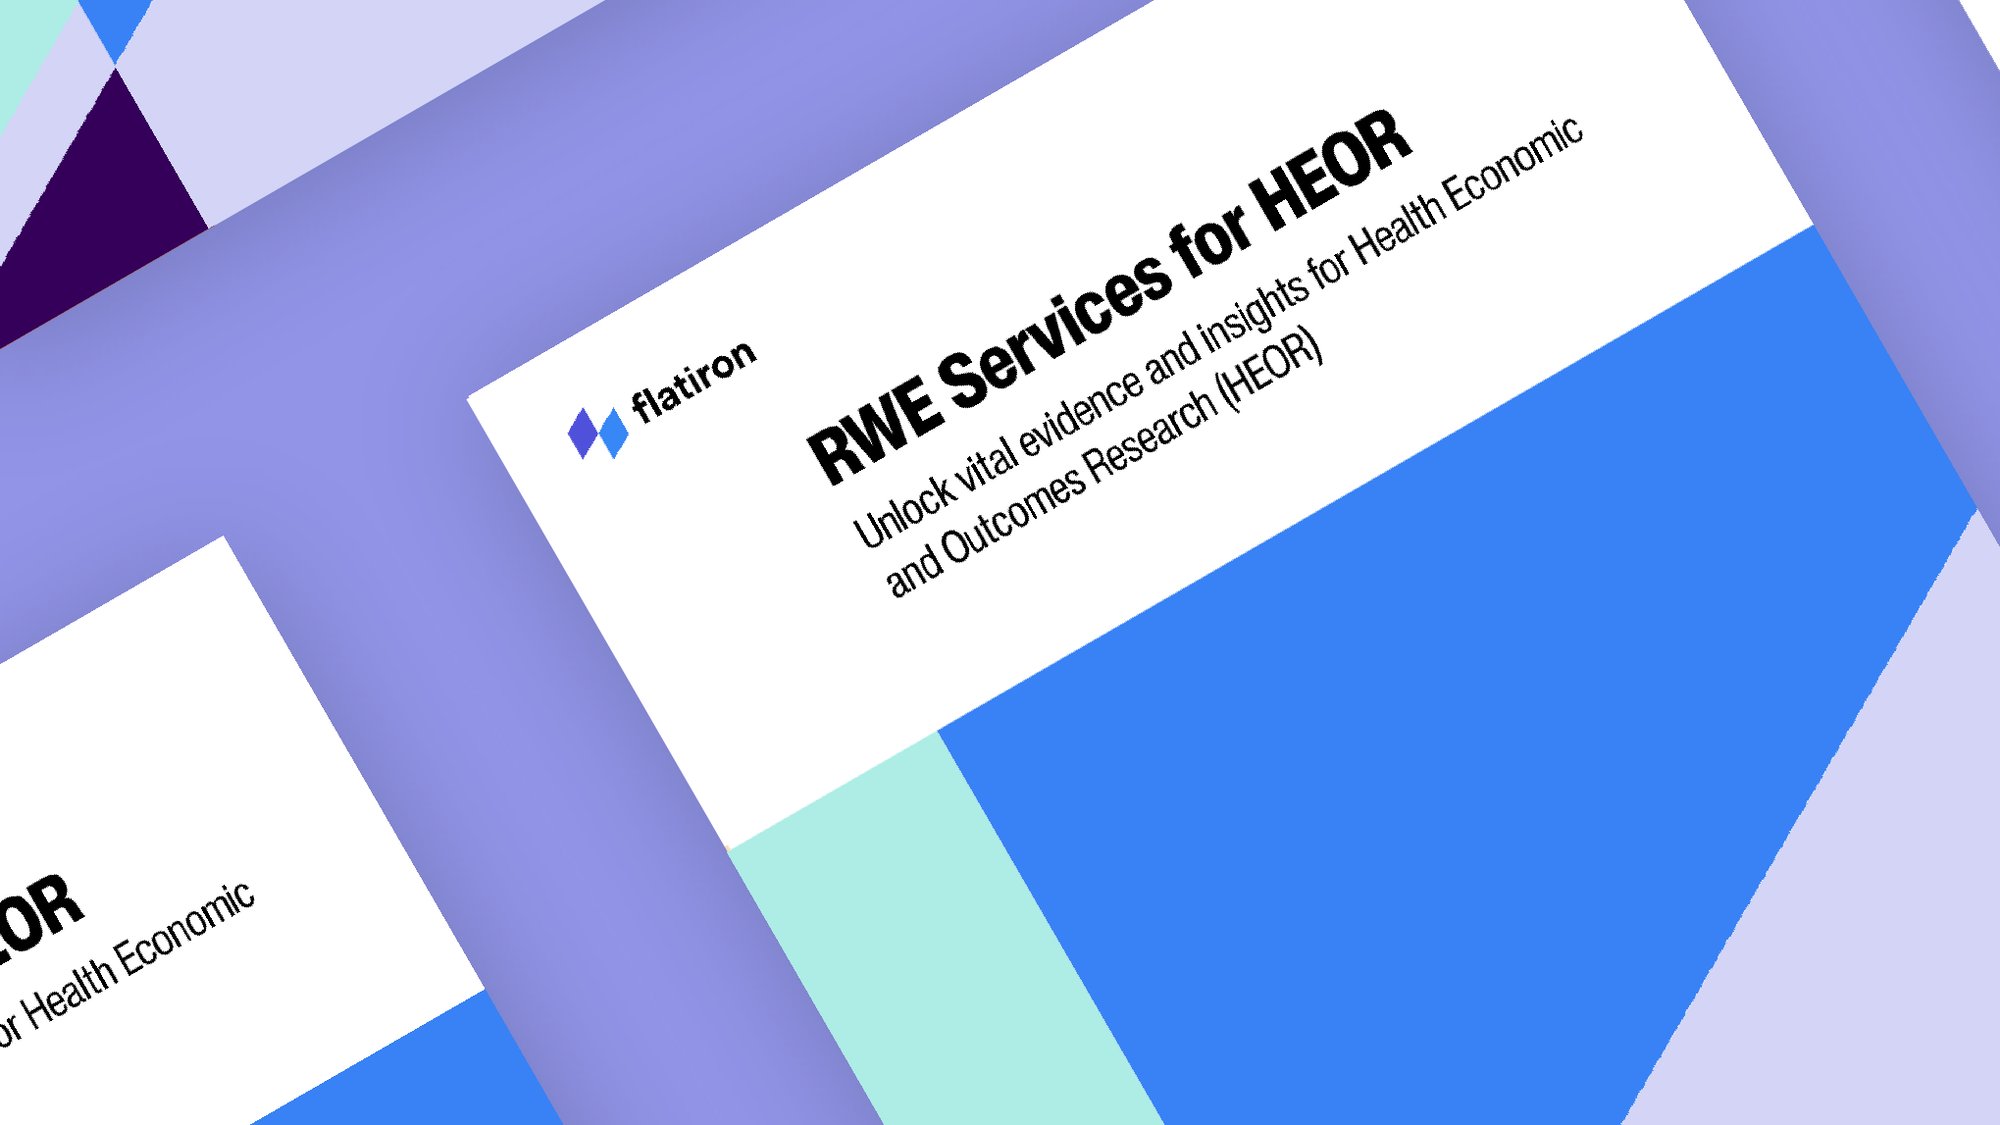 Thumbnail of the downloadable guide "RWE Services for HEOR"